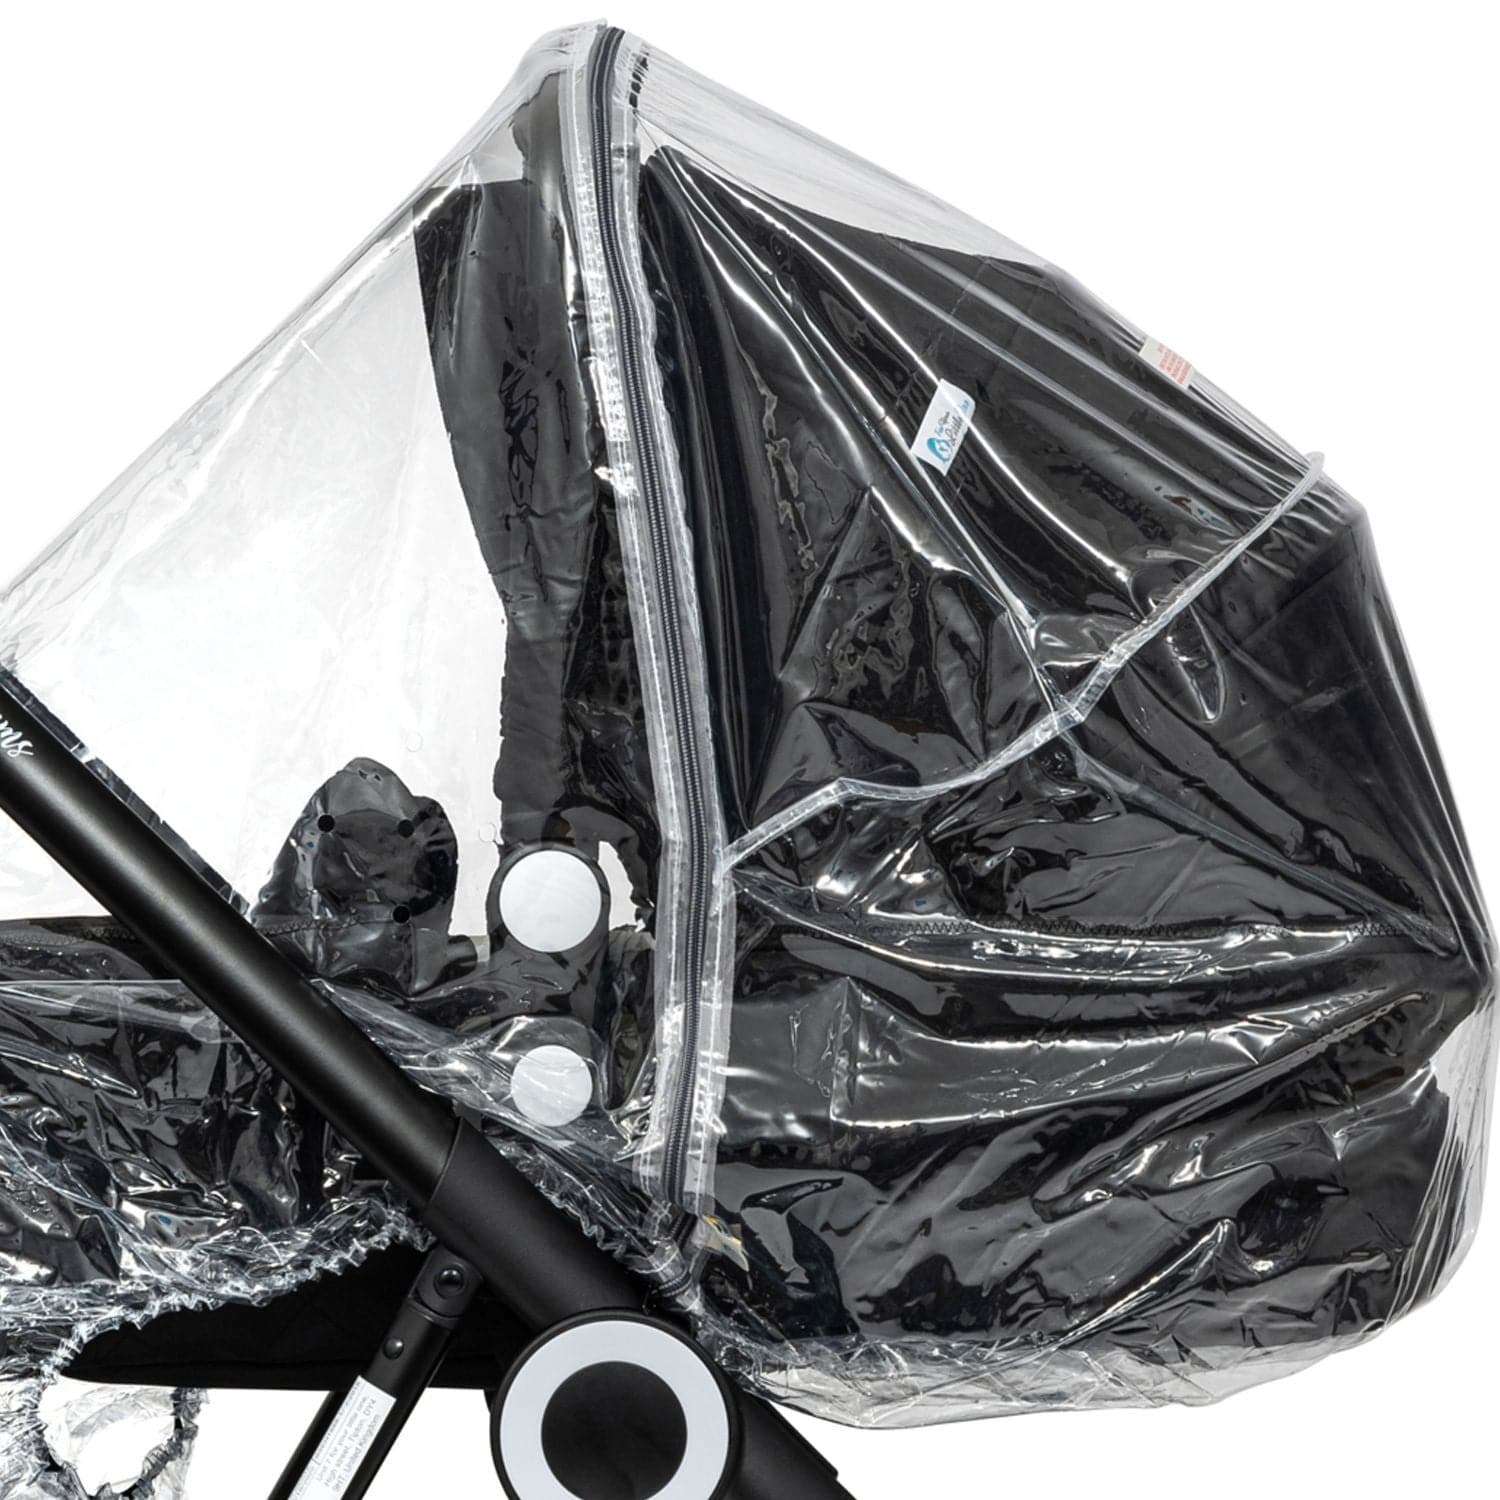 Carrycot Raincover Compatible With Gesslein - Fits All Models - For Your Little One